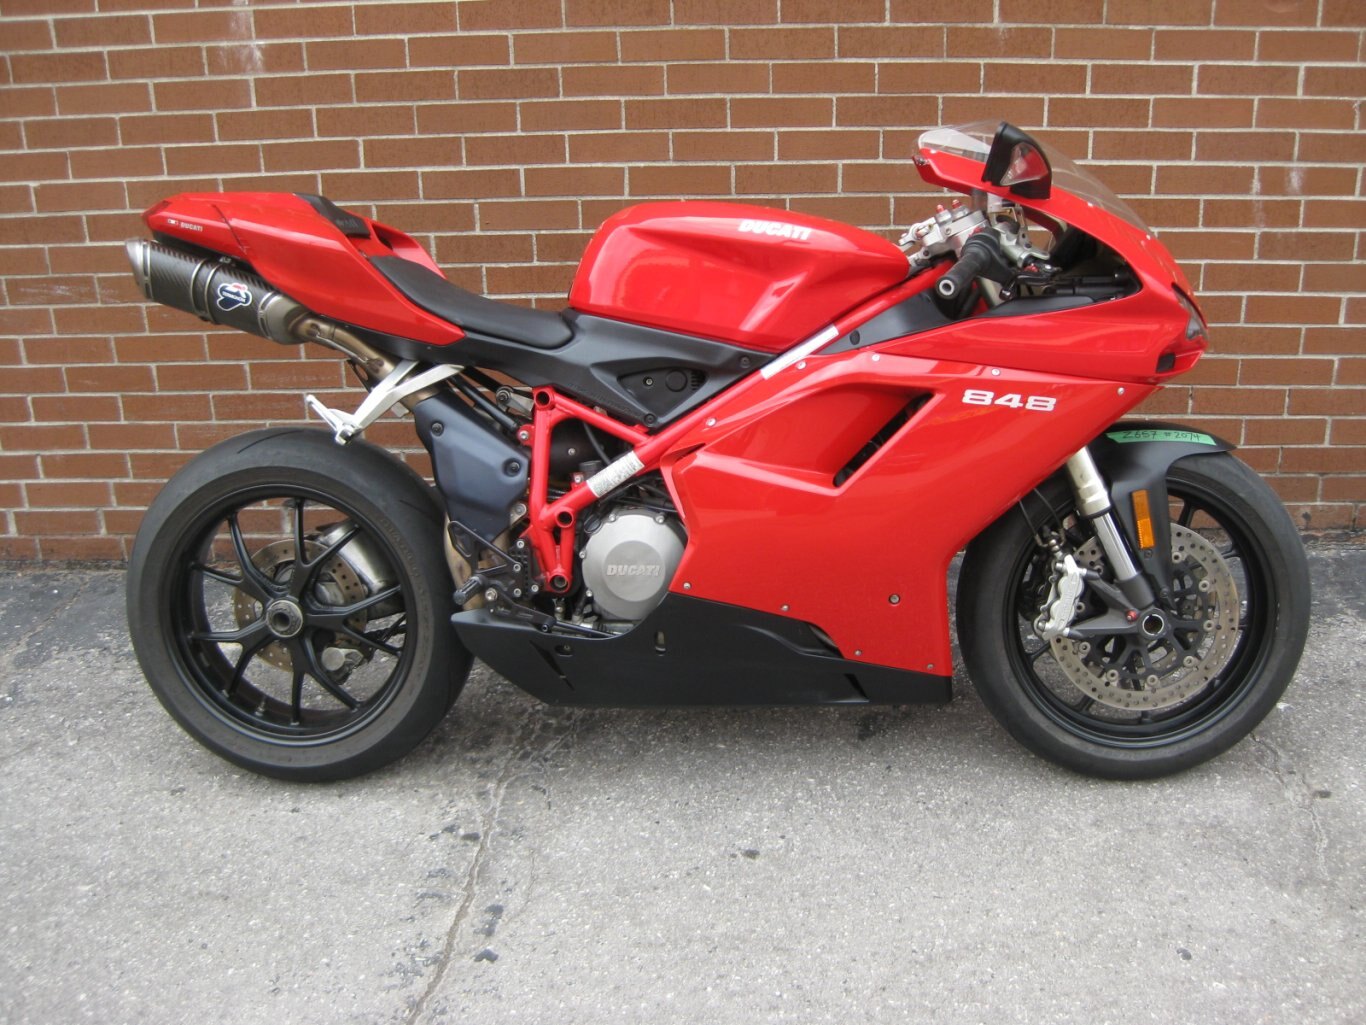 2010 Ducati 848-SOLD CONGRATULATIONS SATISH, WELCOME BACK INTO THE SADDLE OF A DUCATI-WITH THANKS FROM CHRIS AND THE ENTIRE CYCLE WORLD TEAM!!